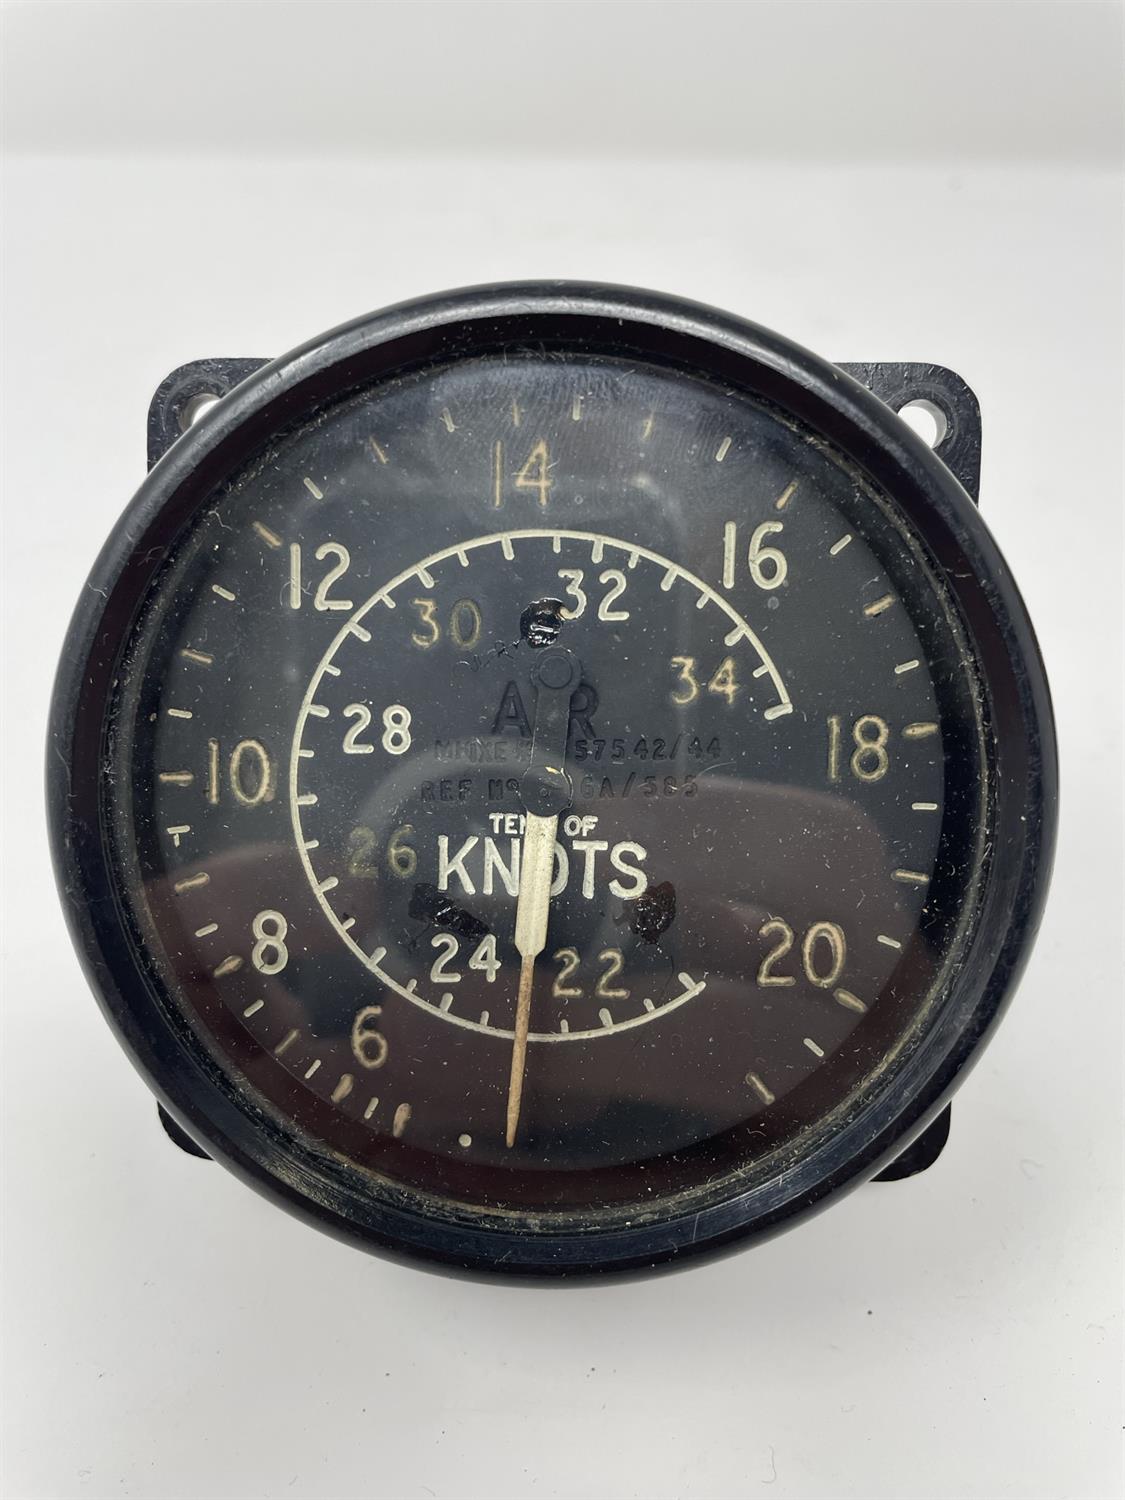 Airspeed Indicator in Knots with Period-Correct Box Dated 1944* - Image 3 of 10